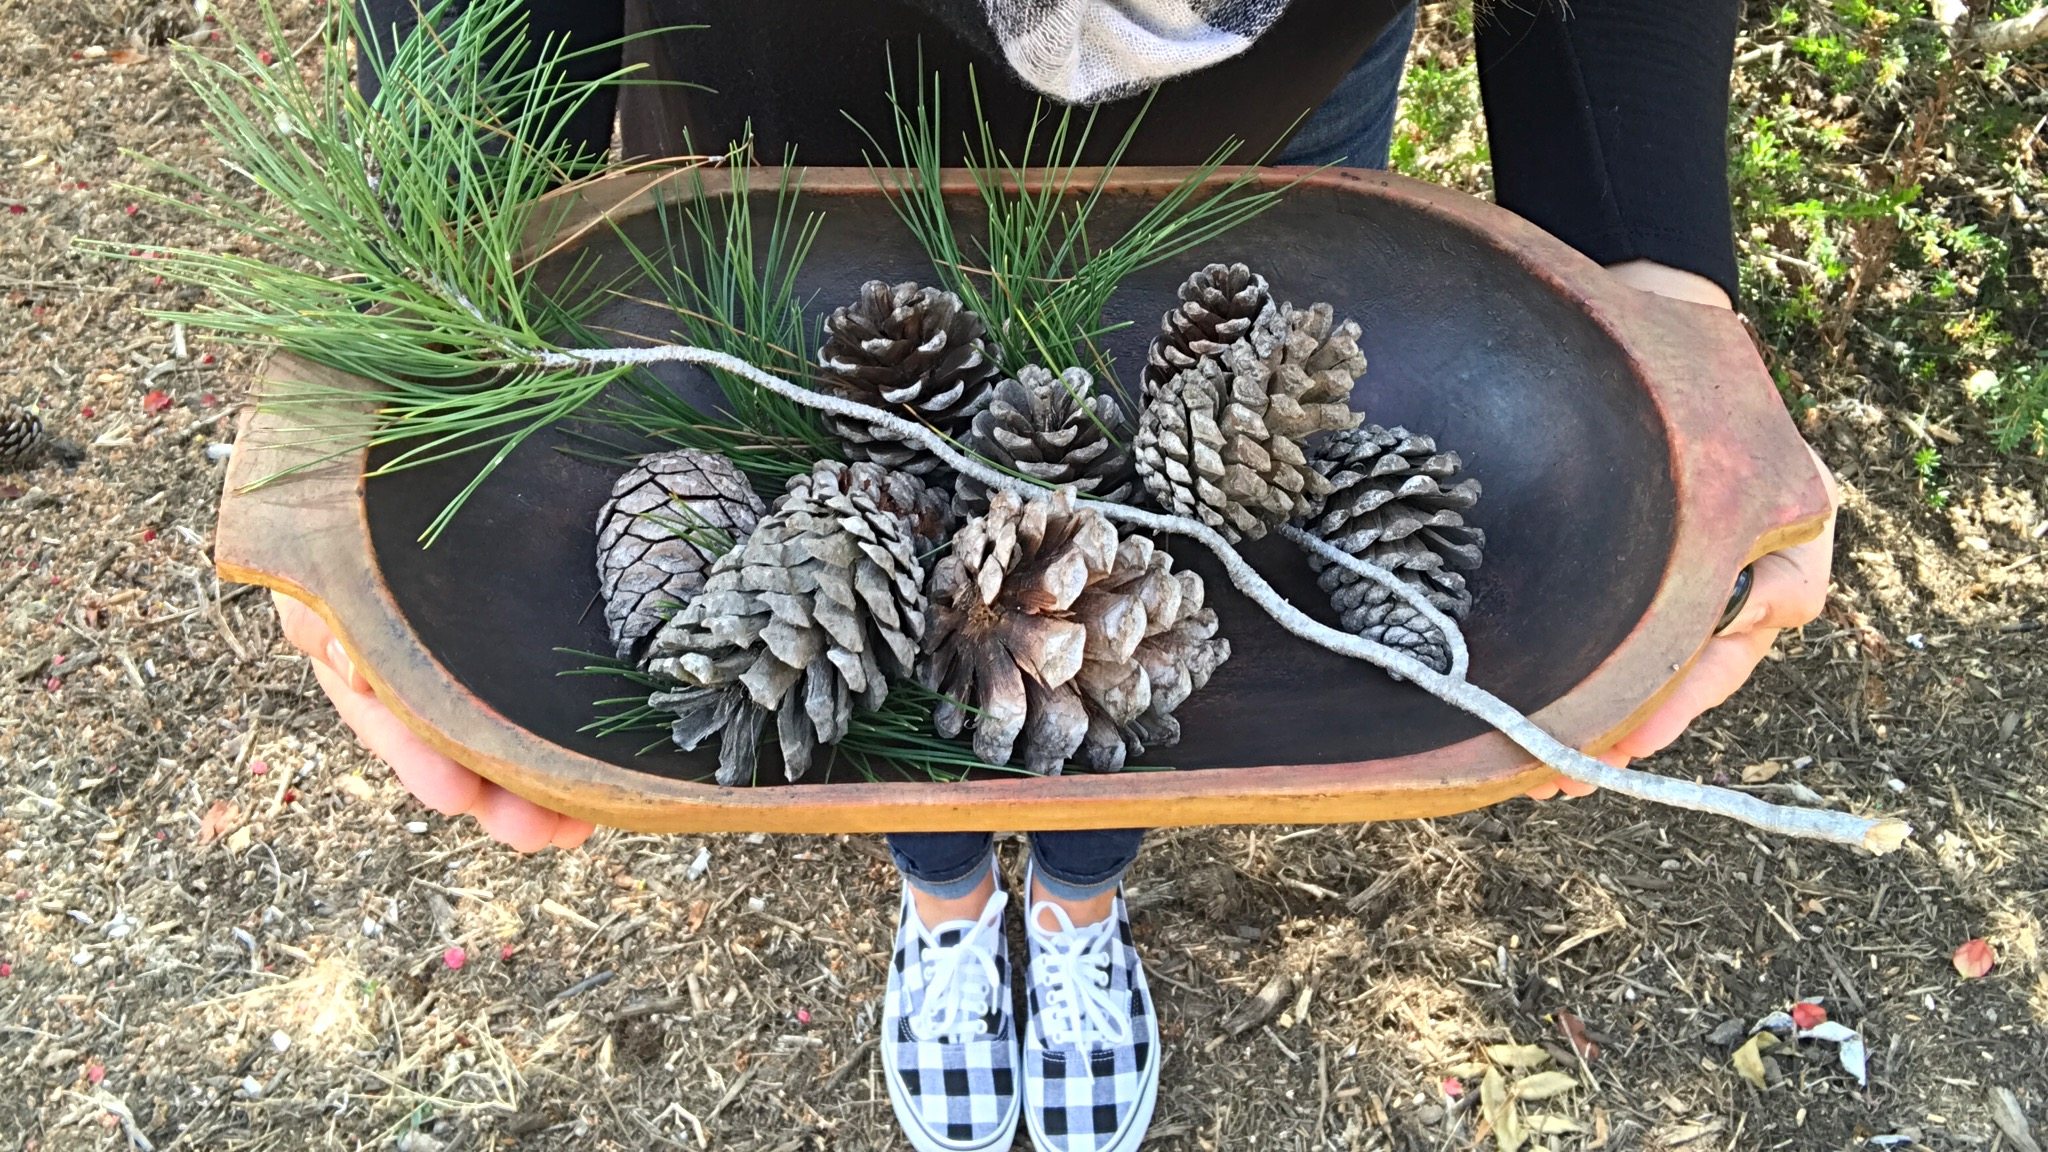 How To Treat Outdoor Pine Cones For Crafts - Jaclyn James Company